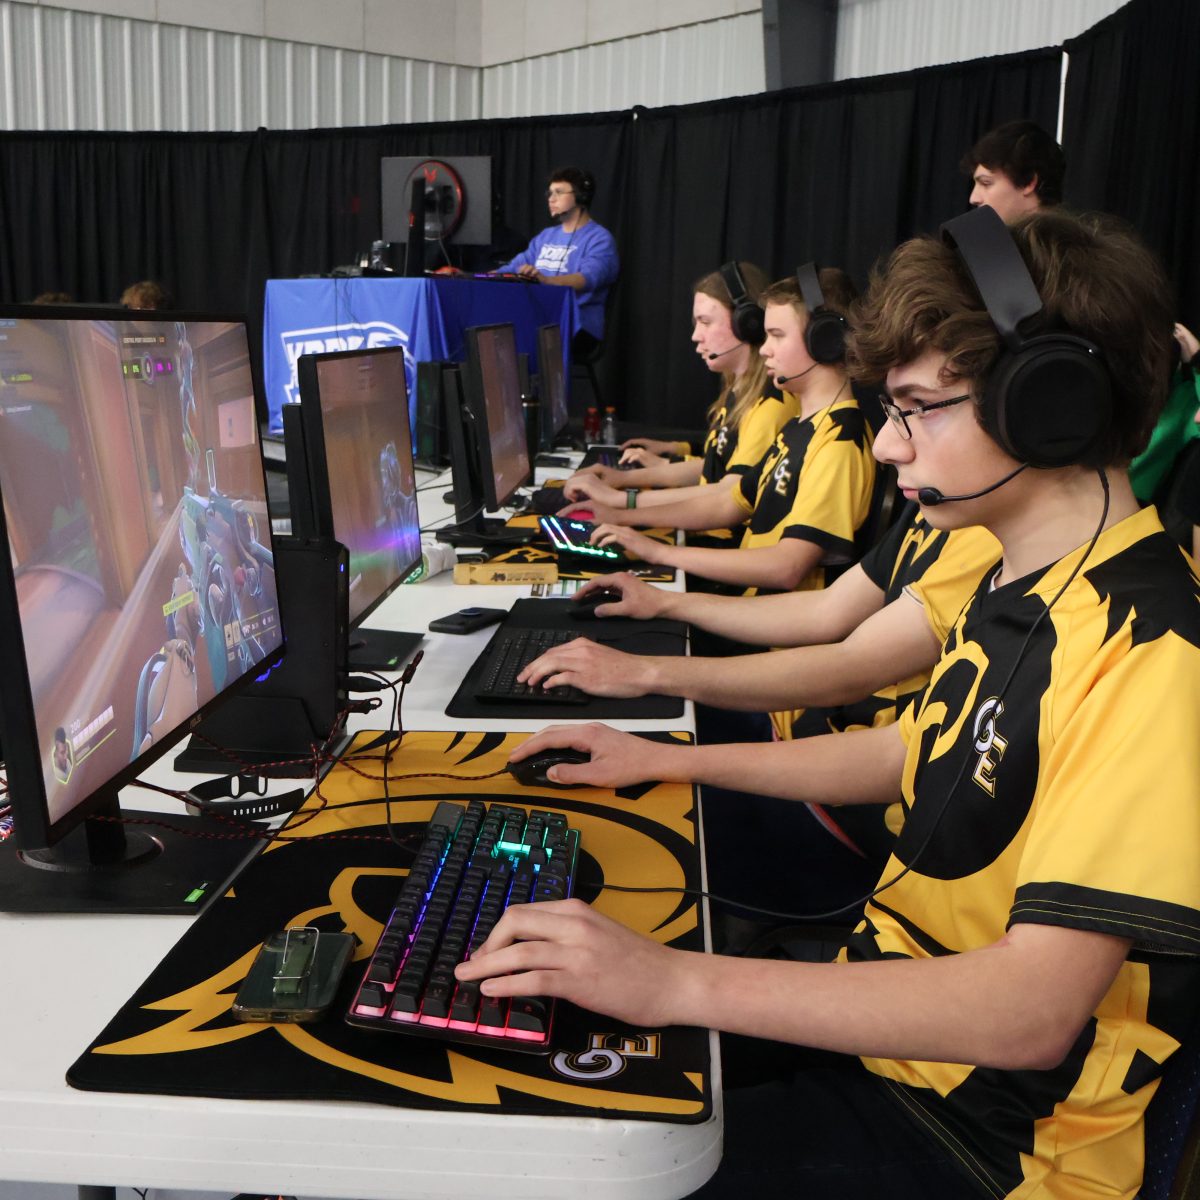 Eyes on the screen, sophomores Jackson Omel, Zachary Thompson and Weldon compete in the Overwatch 2 finals against York. The team ended up losing 0-2, earning second place.